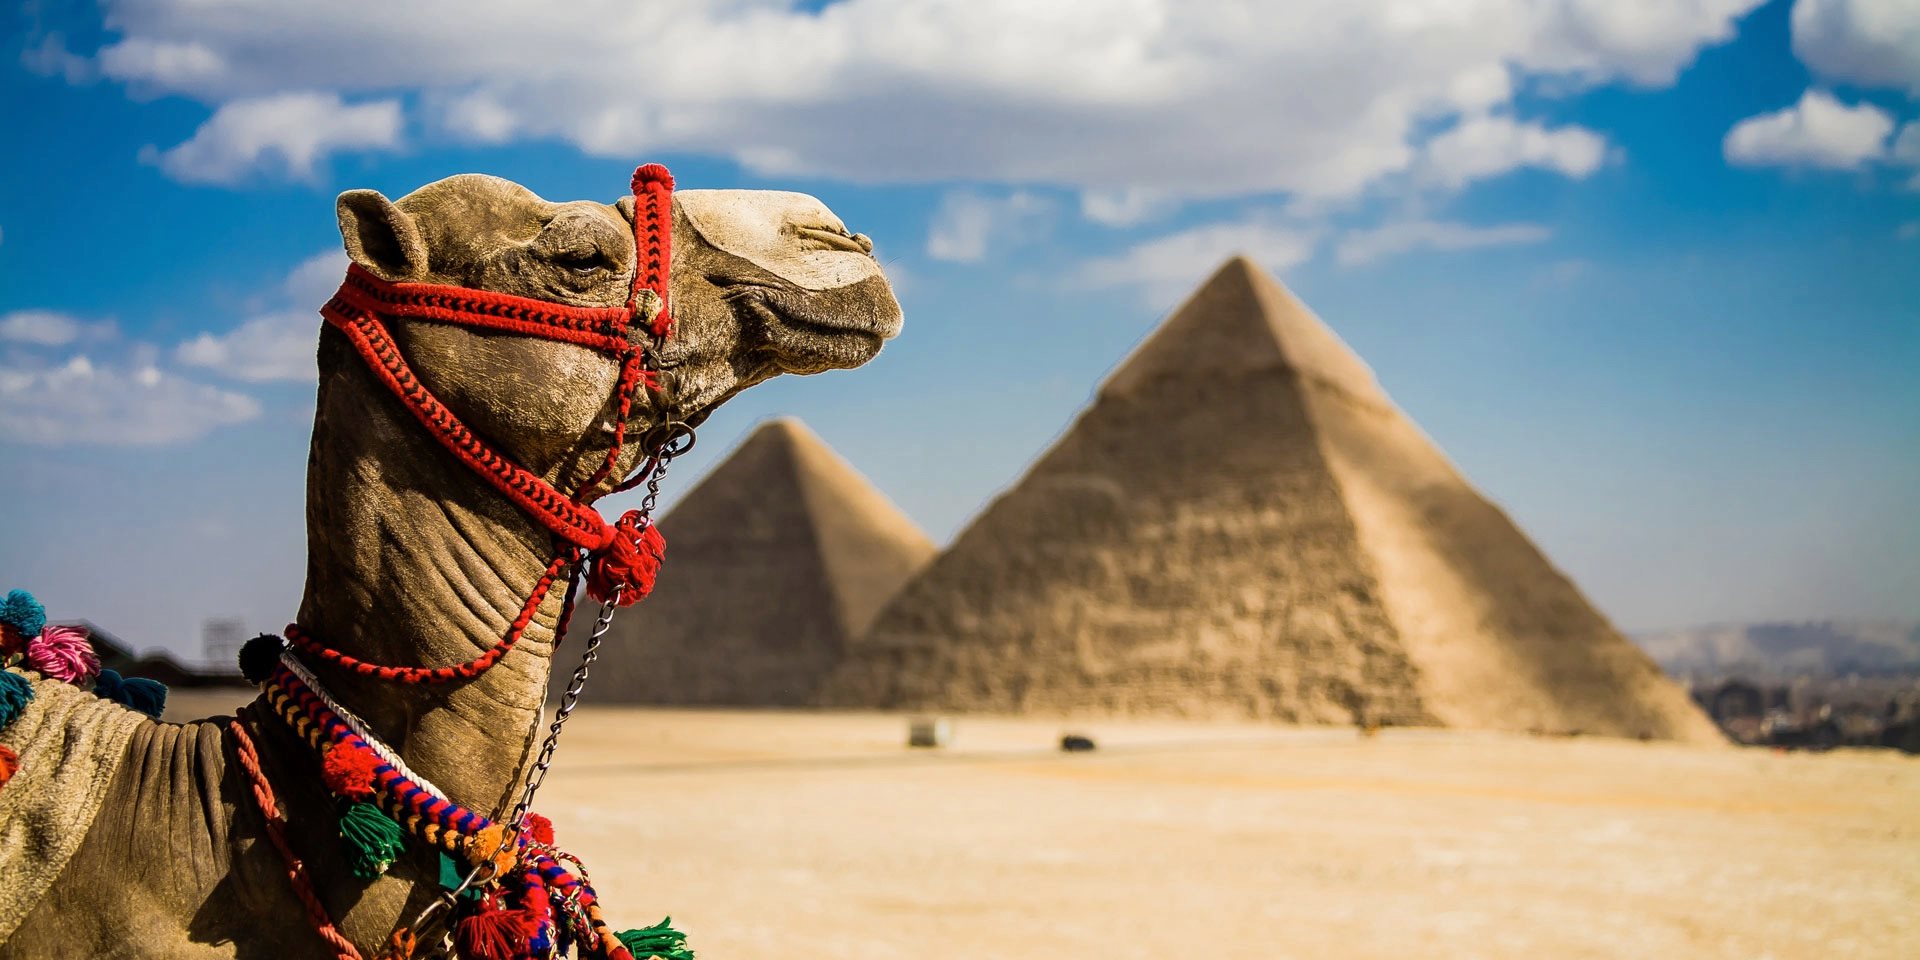 Great News for travelers to Egypt